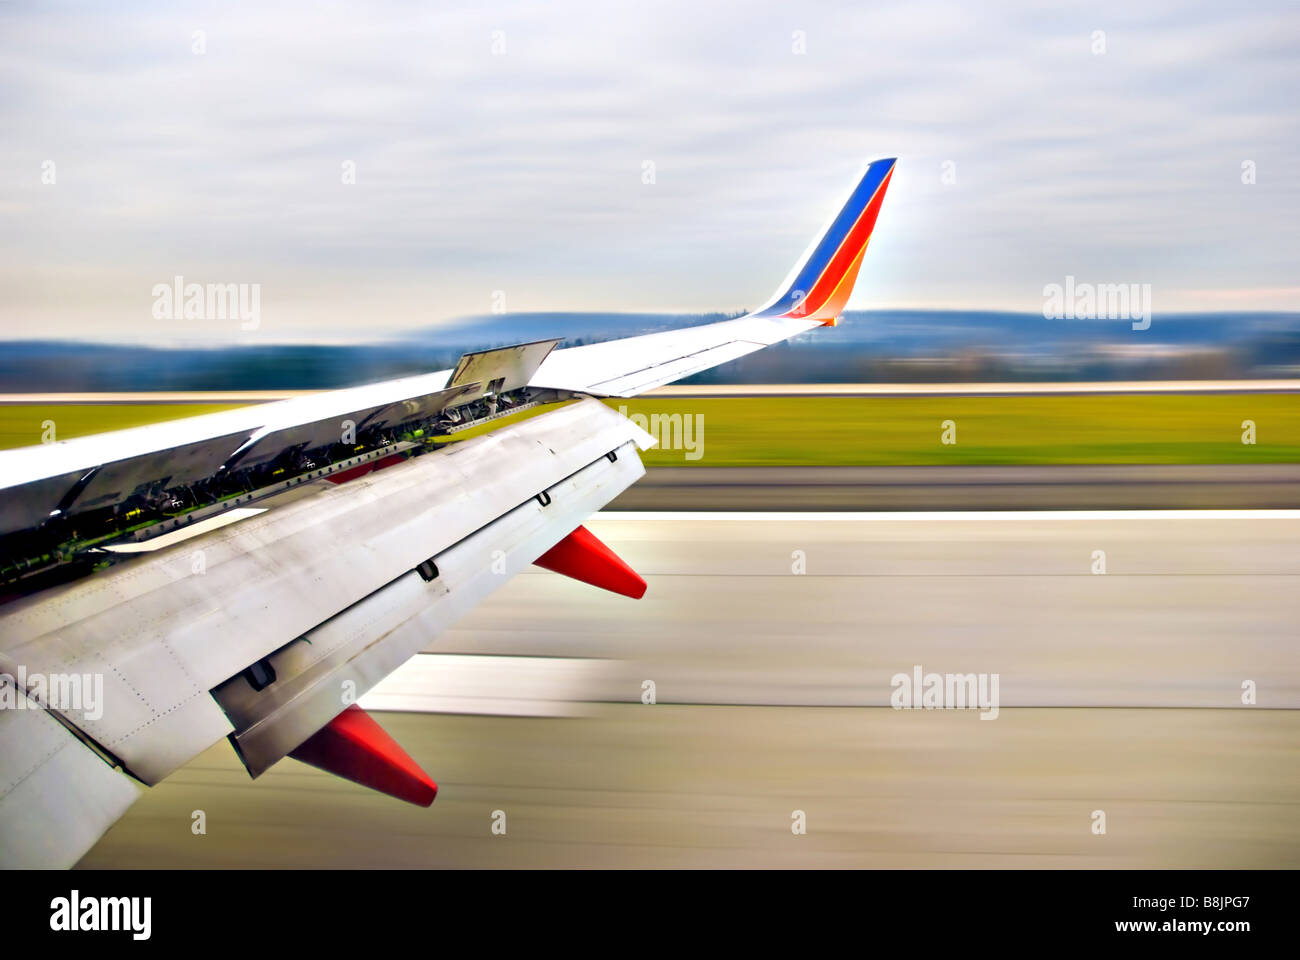 Airplane wing open upon landing on runway in motion Stock Photo